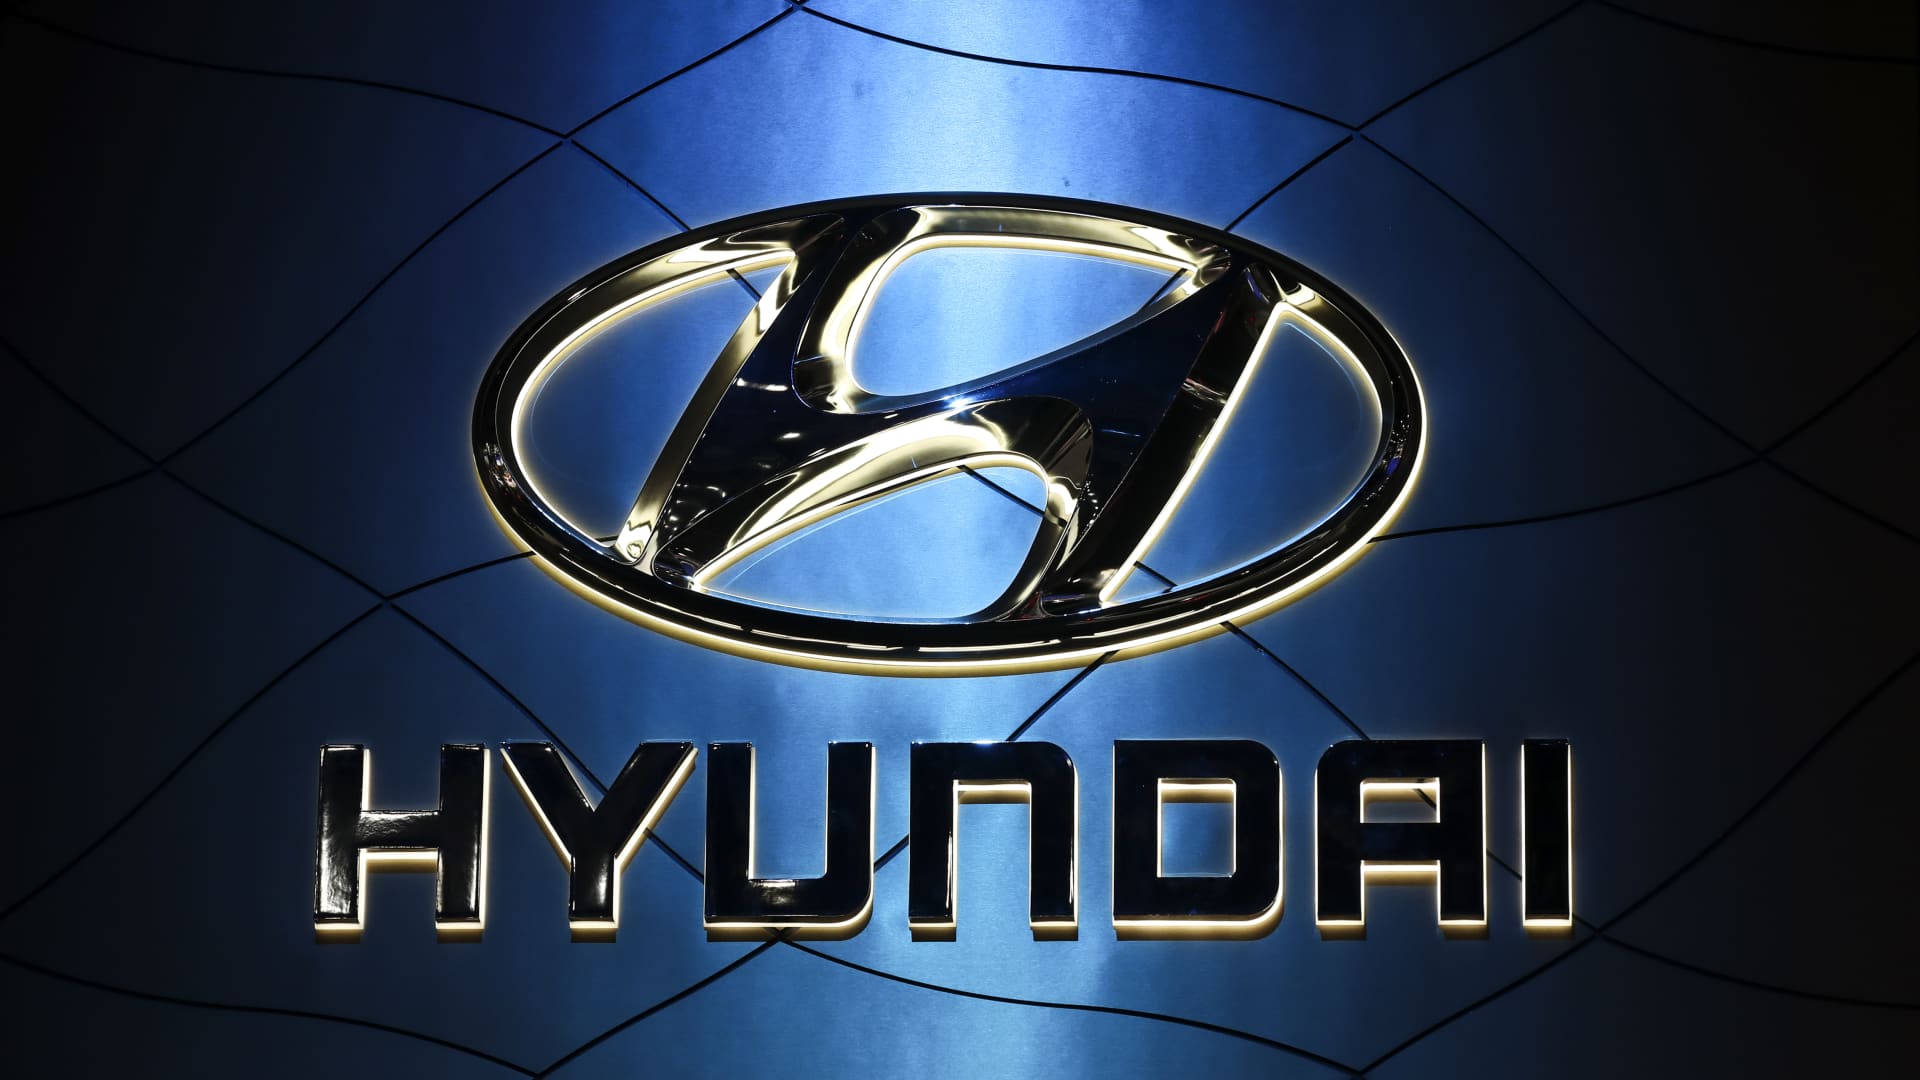 Hyundai plans  billion investment in U.S. on mobility technology such as autonomous driving and robotics